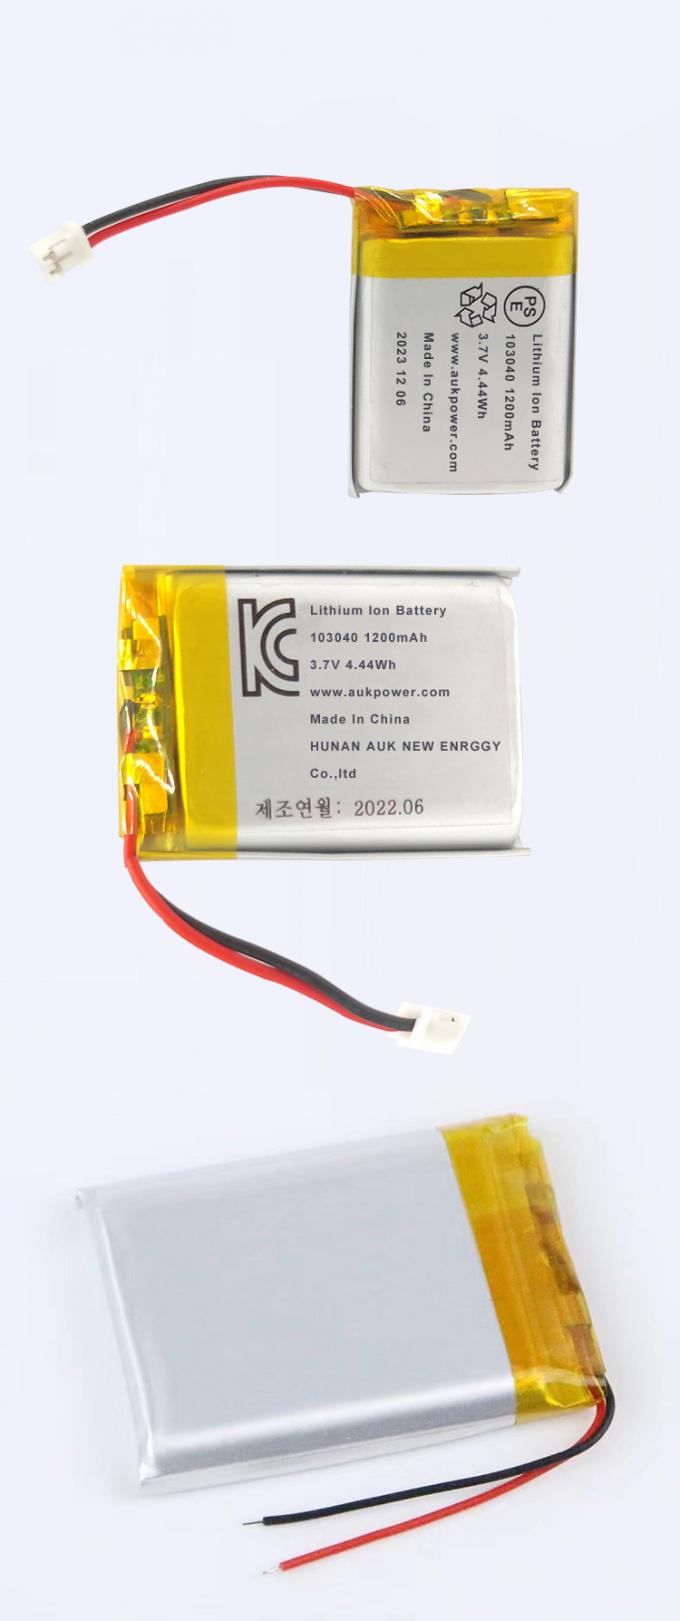 Universal 103040 Battery Rechargeable Lithium Ion Polymer Battery 3.7v 1200mah 0